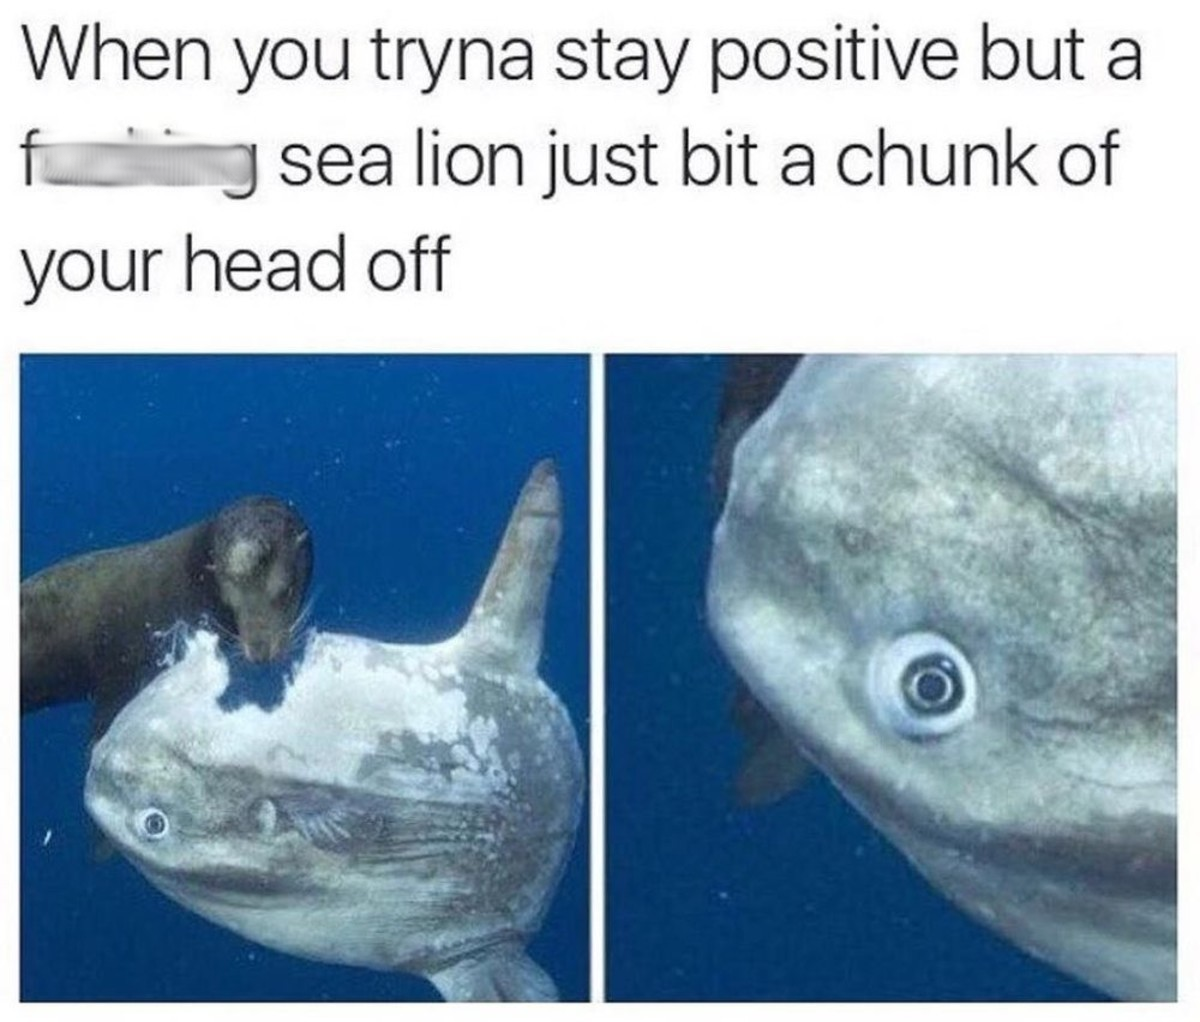 you tryna stay positive - When you tryna stay positive but a y sea lion just bit a chunk of your head off